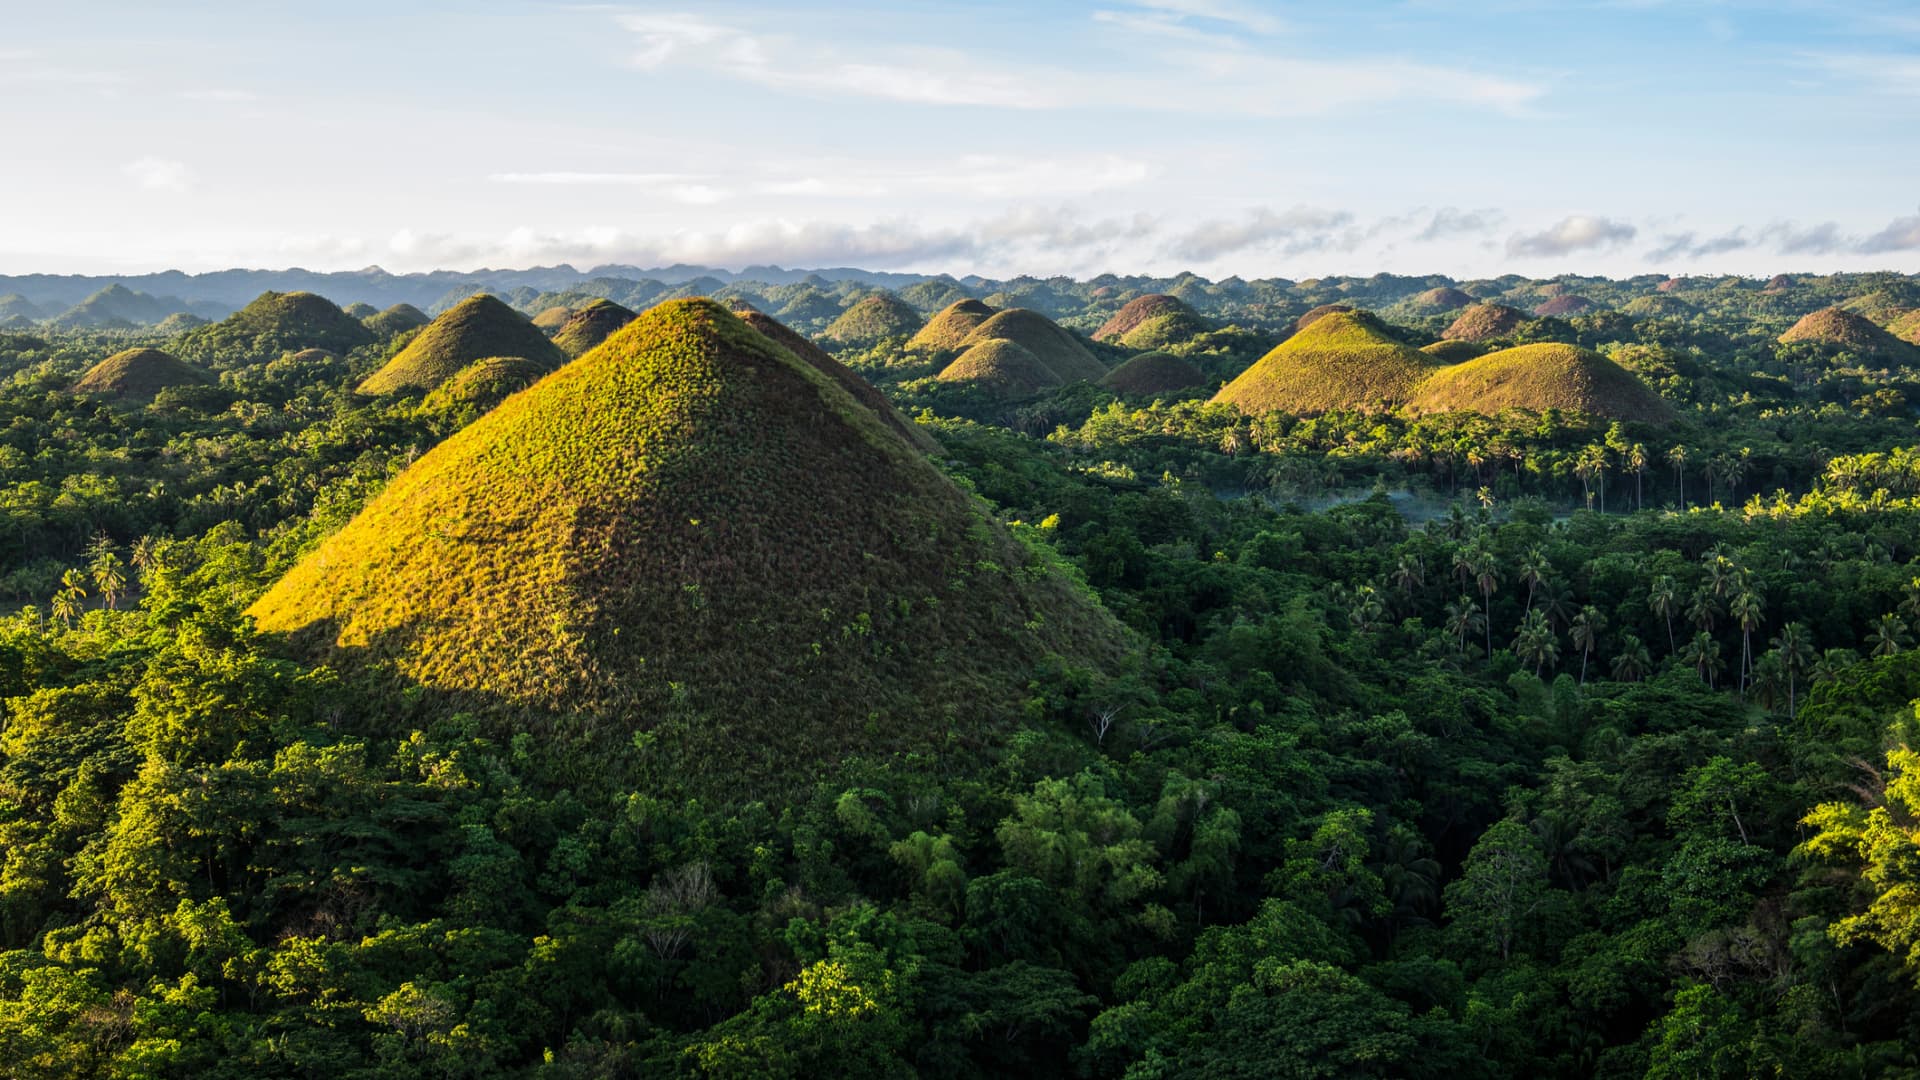 Bohol's Chocolate Hills are named after the browning that occurs when the grass dries during the first half of the year.